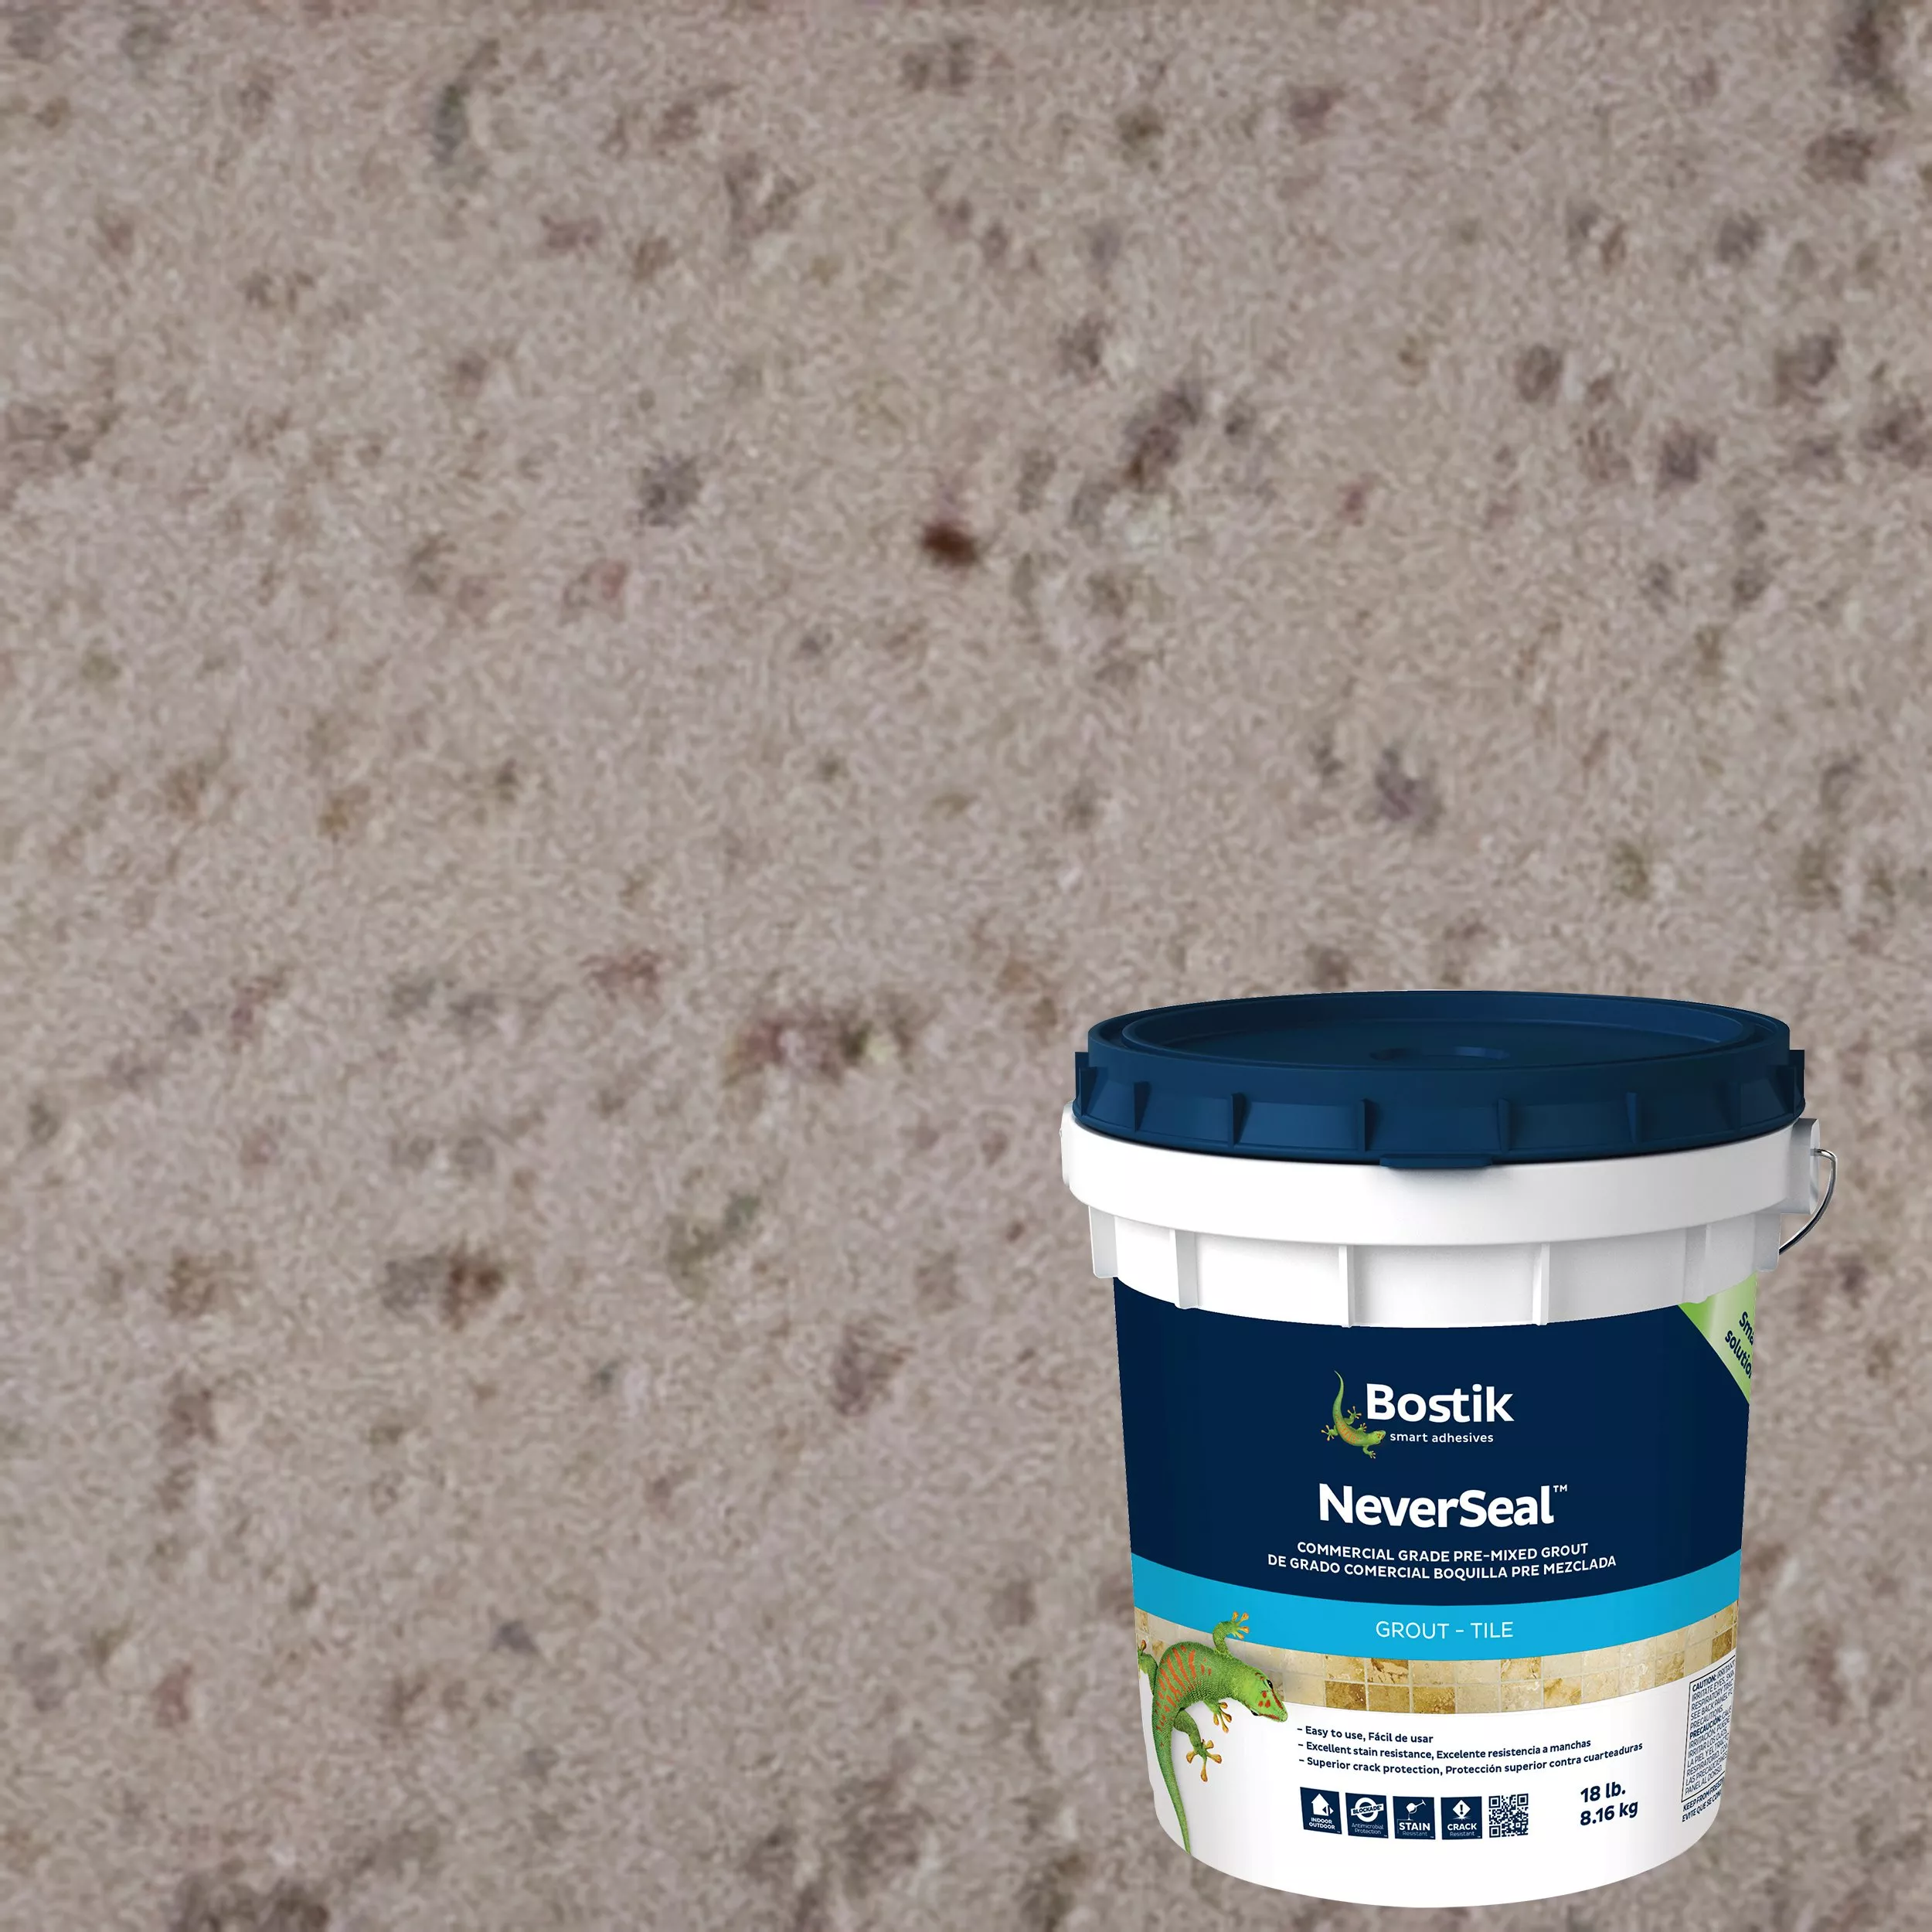 Bostik Neverseal Misty Gray Pre-Mixed Commercial Grade Grout